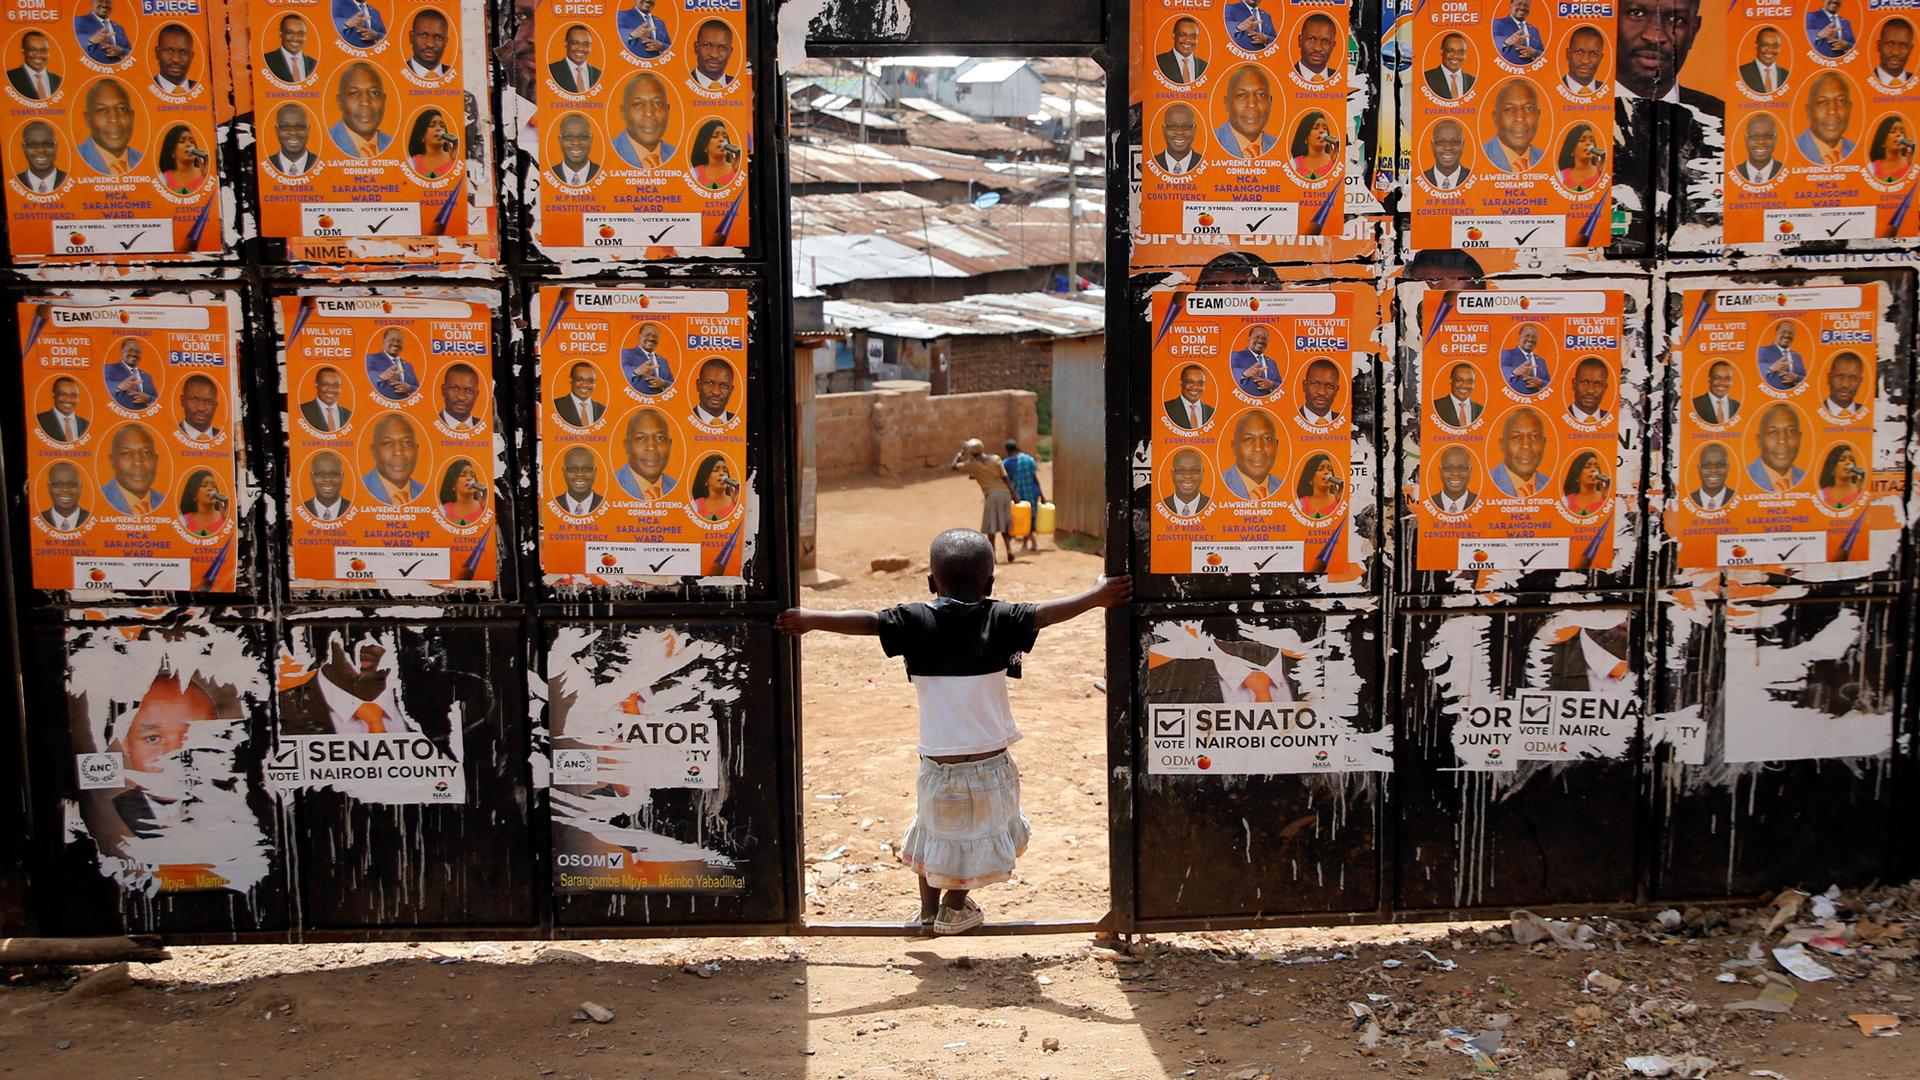 A child plays at the entrance of a polling station pasted with campaign posters ahead of the presidential election in the Kibera slums of Nairobi, Kenya.